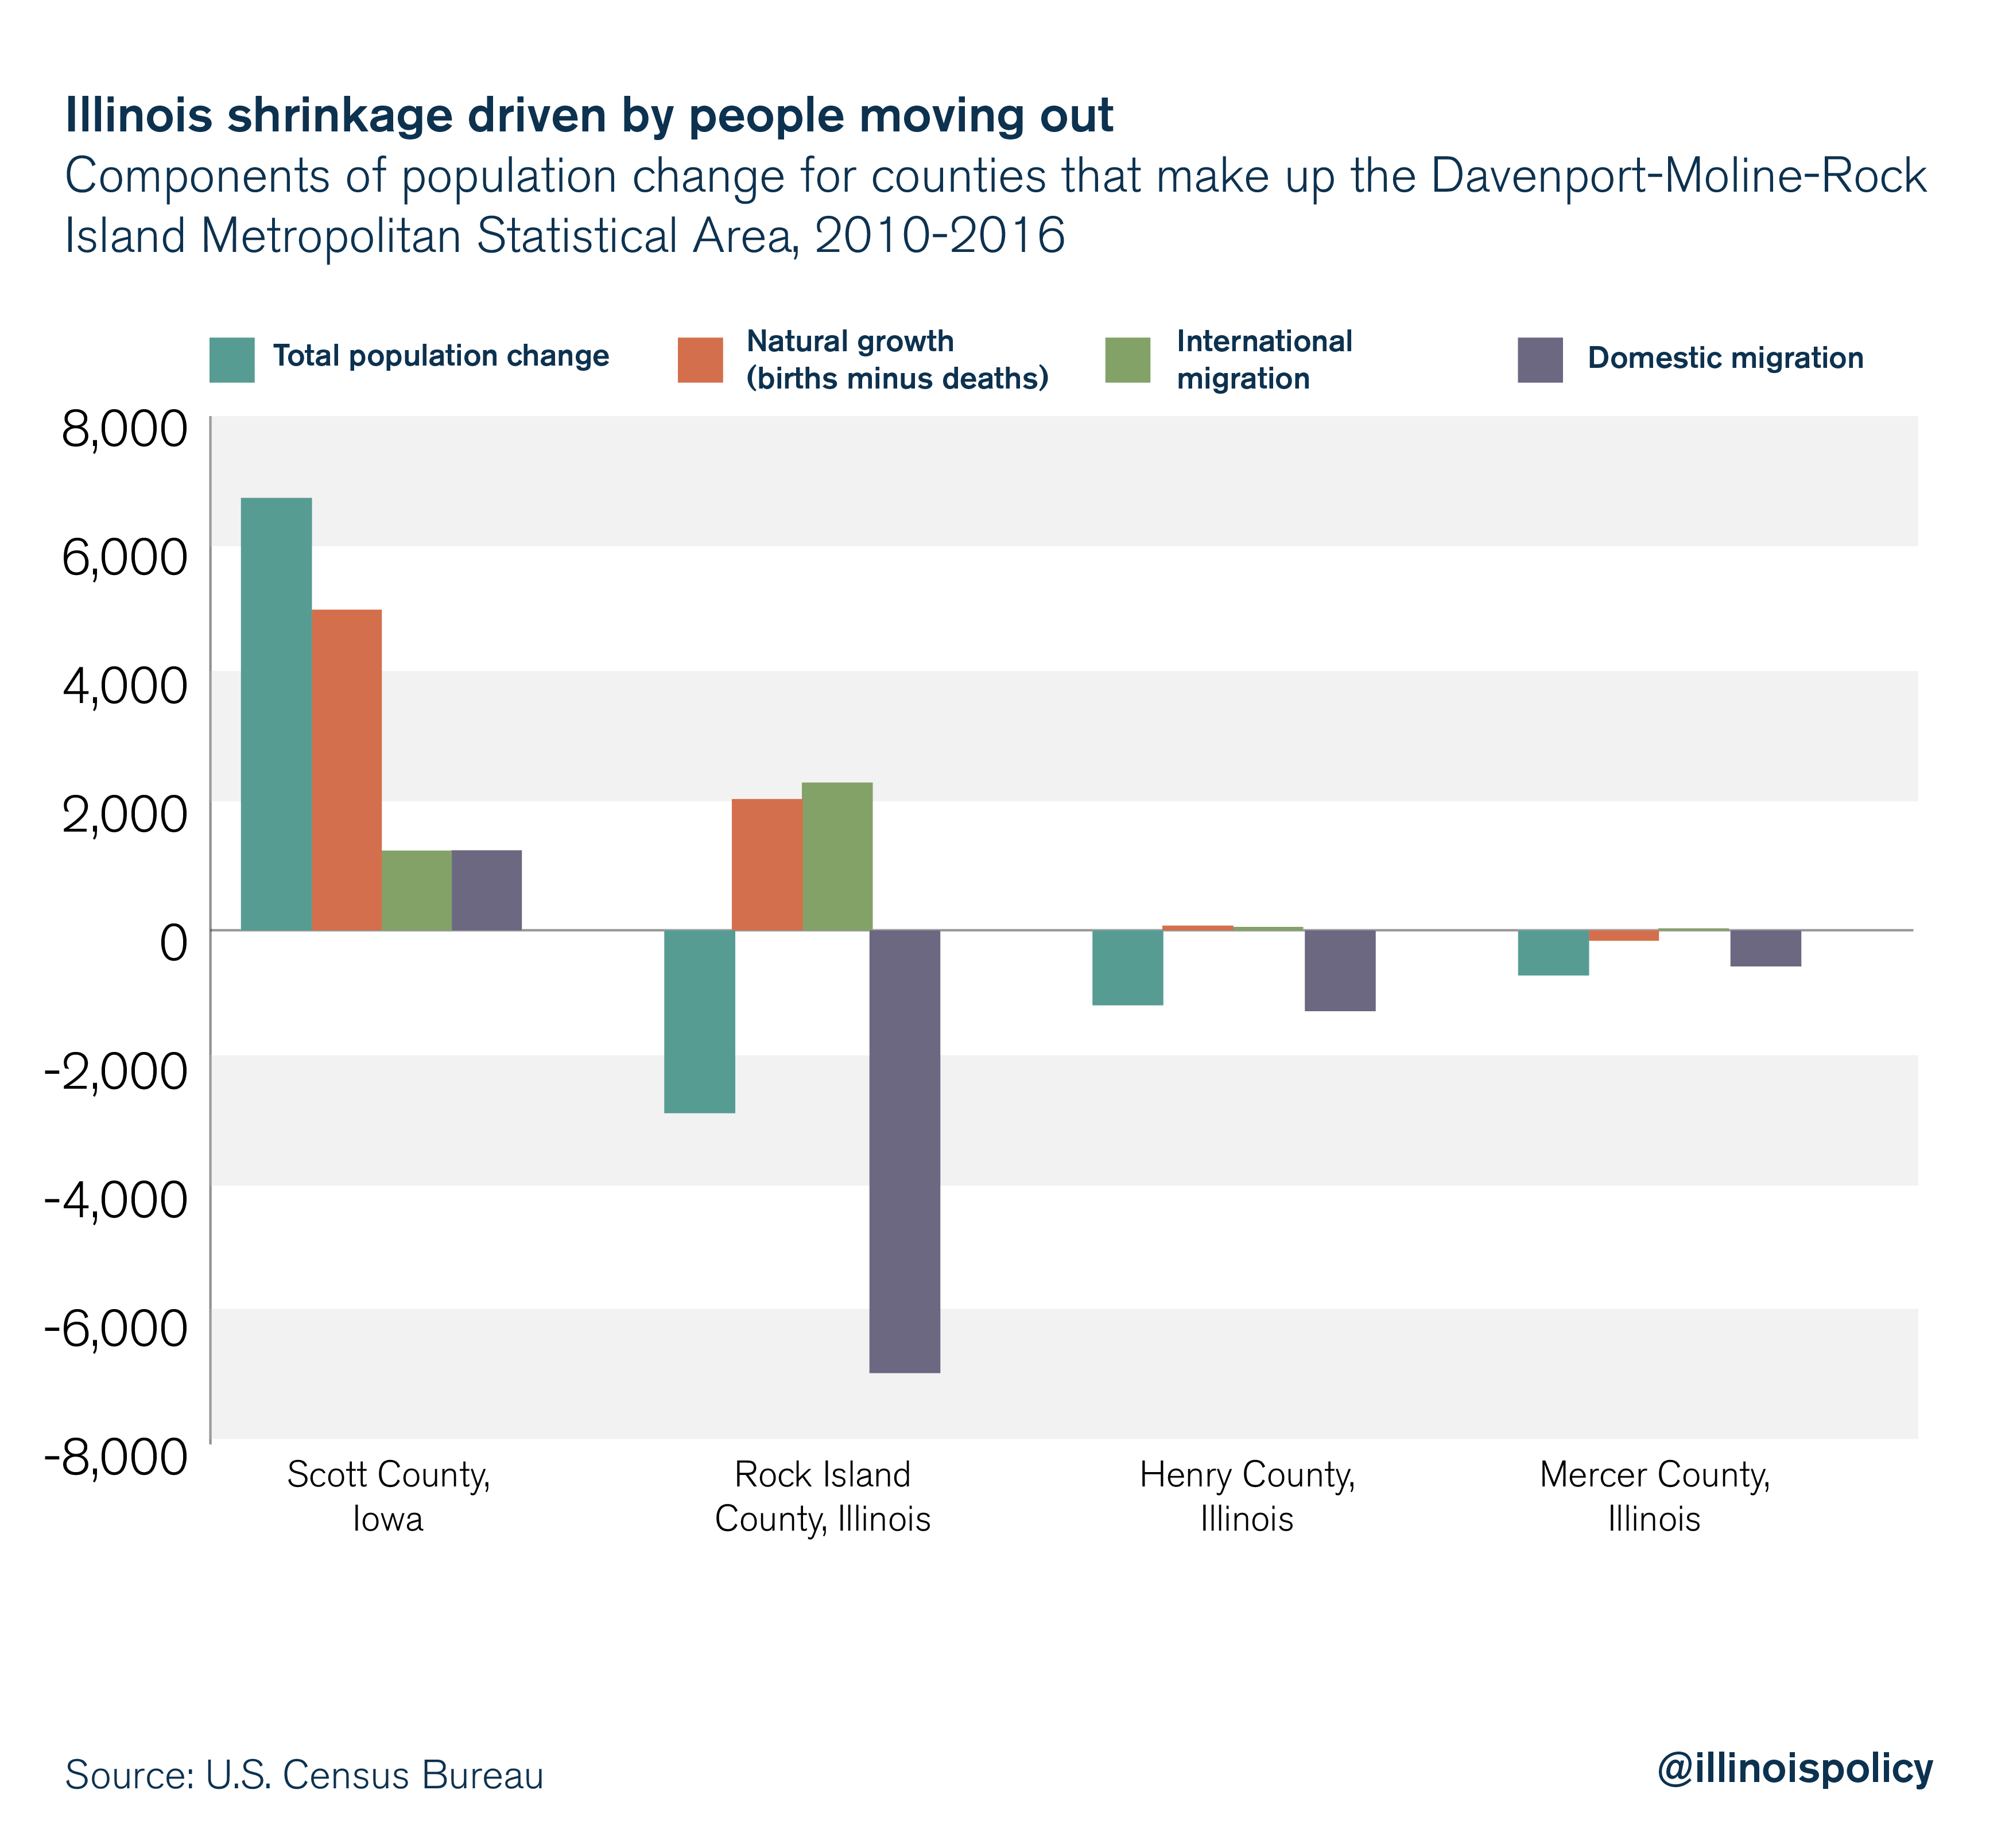 Illinois shrinkage driven by people moving out